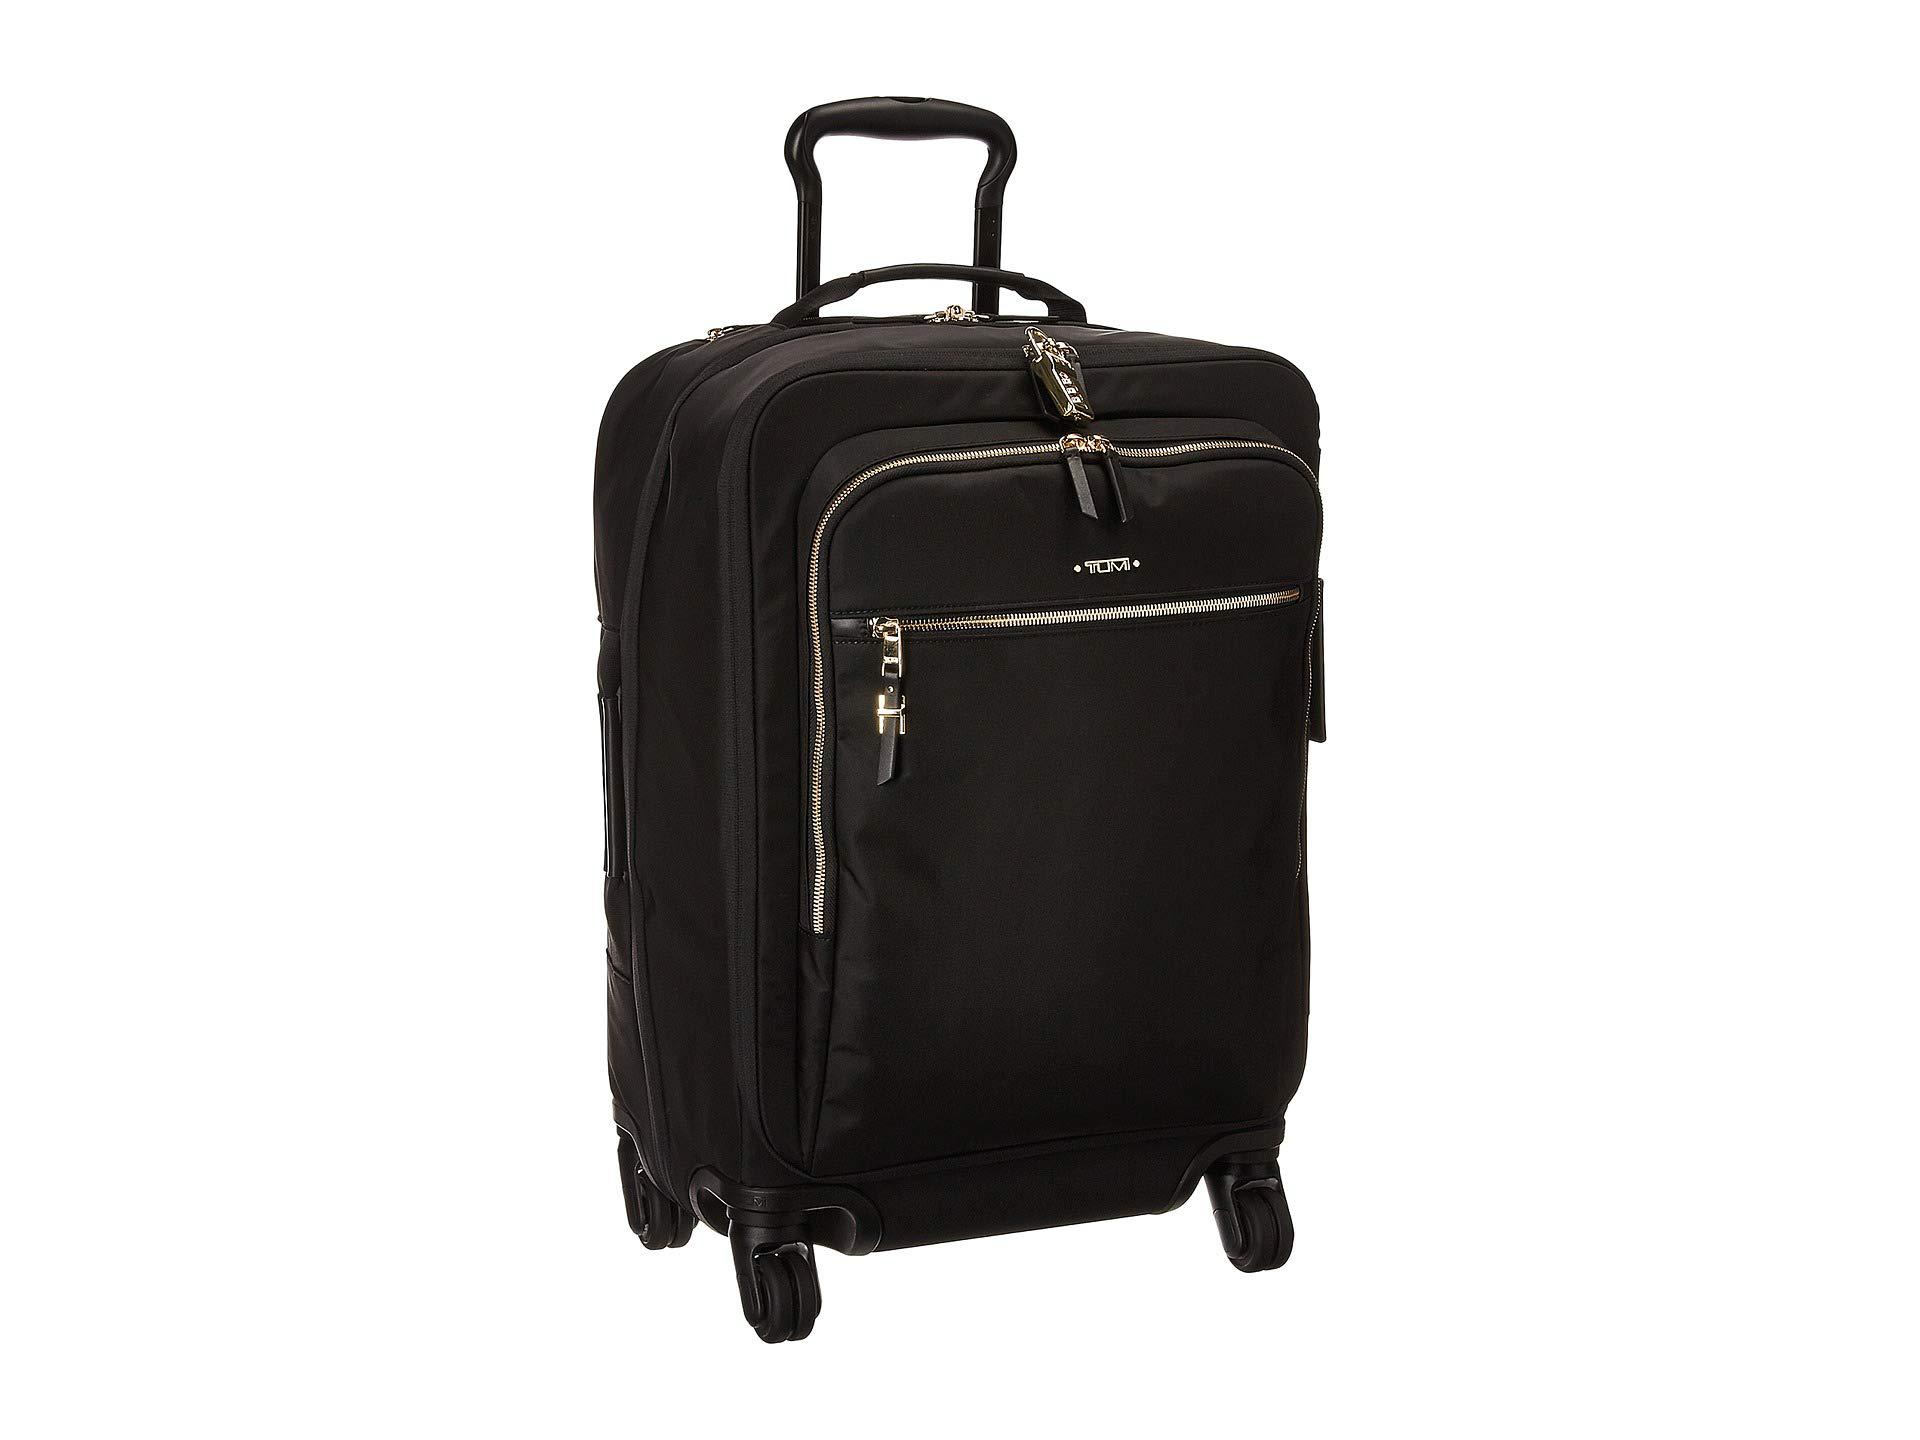 Lyst - Tumi Voyageur Tres Leger International Carry-on (navy) Carry On Luggage in Black